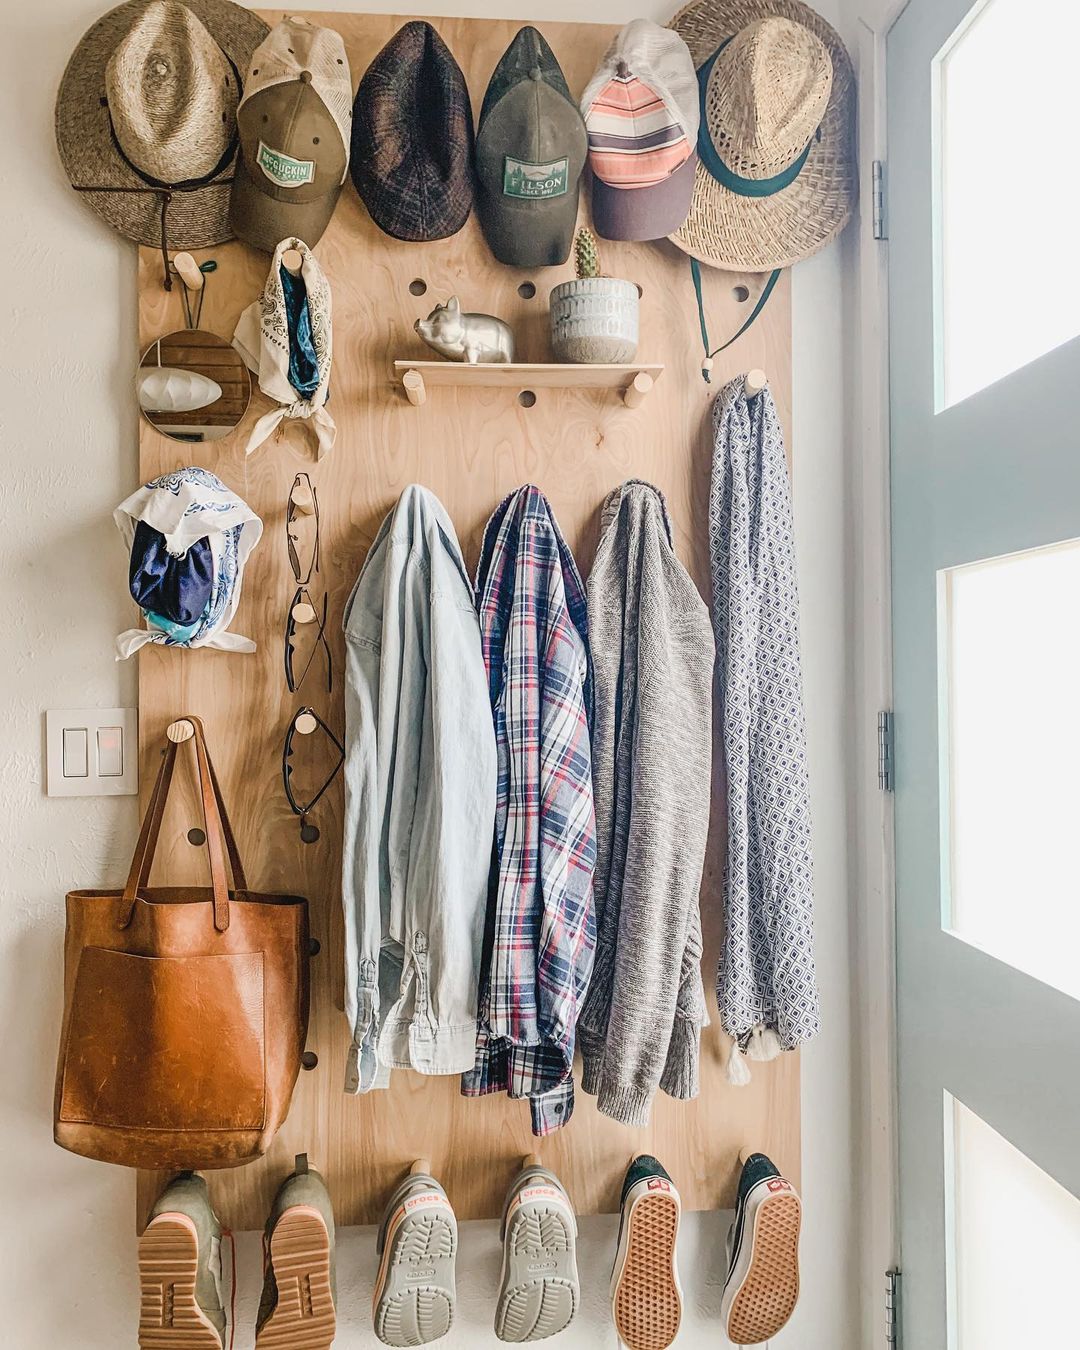 Organization Made Stylish: How to Decorate with a Wall Pegboard